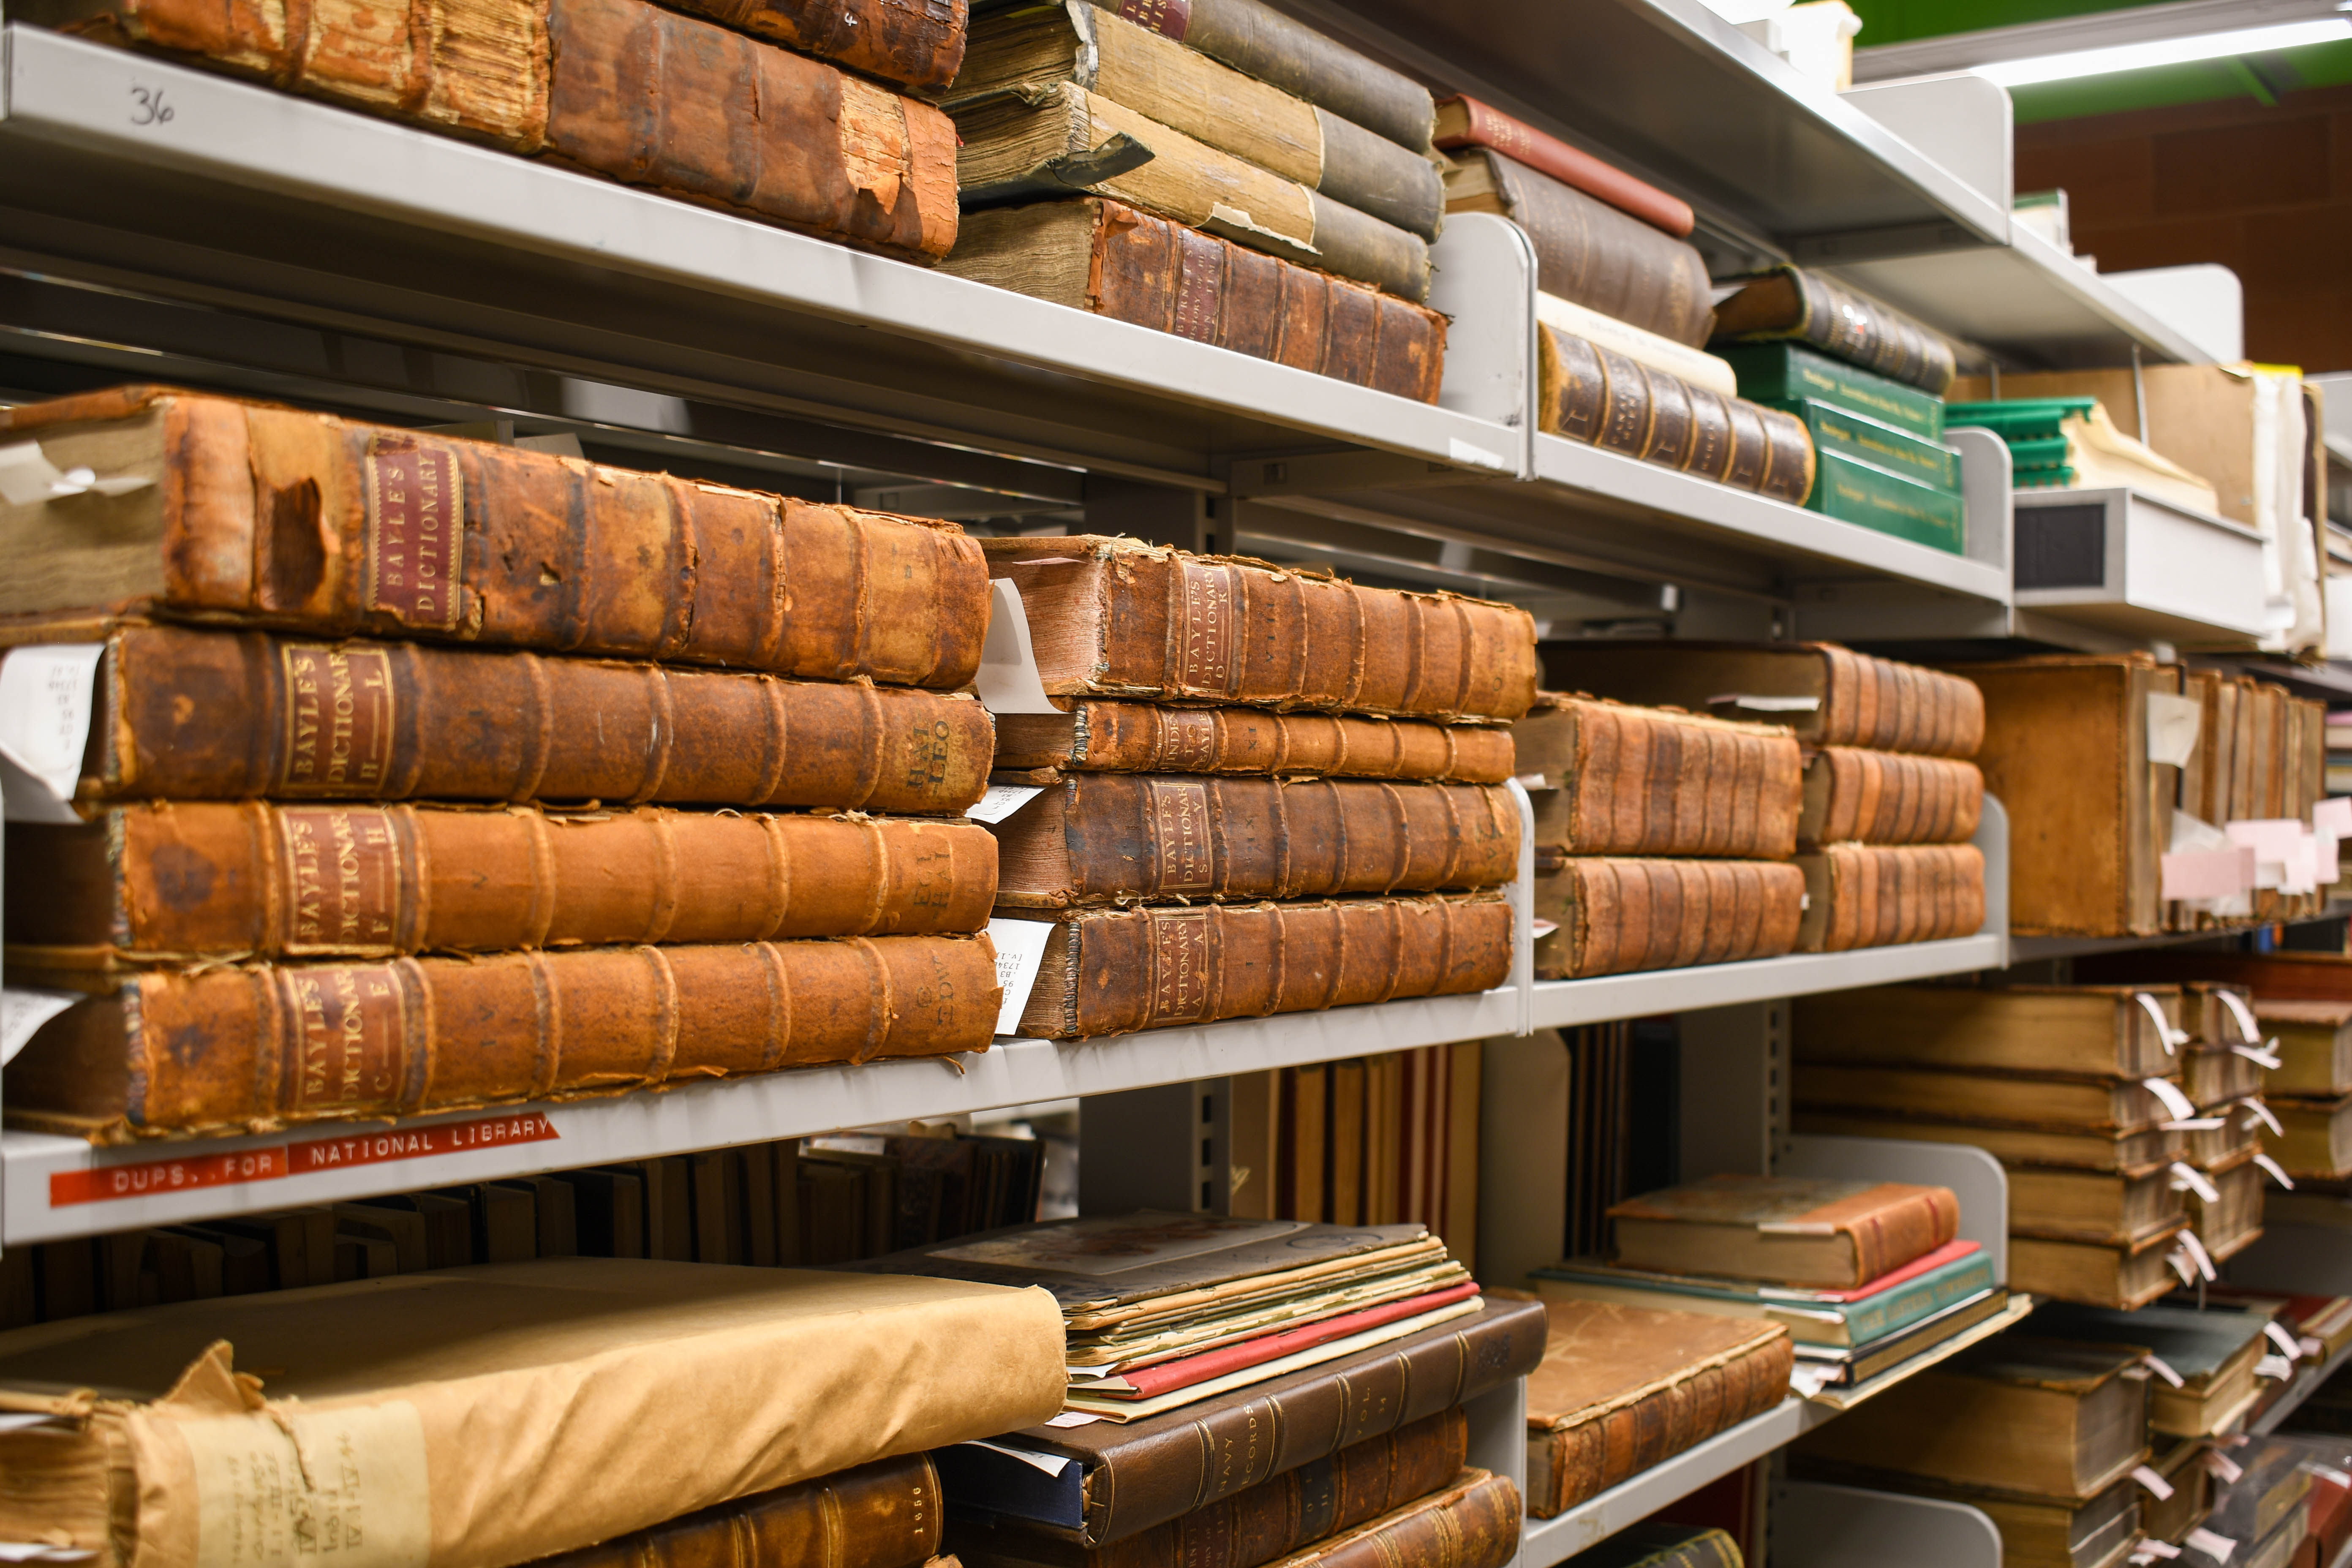 Colour photograph of old leather bound books laying on shelves